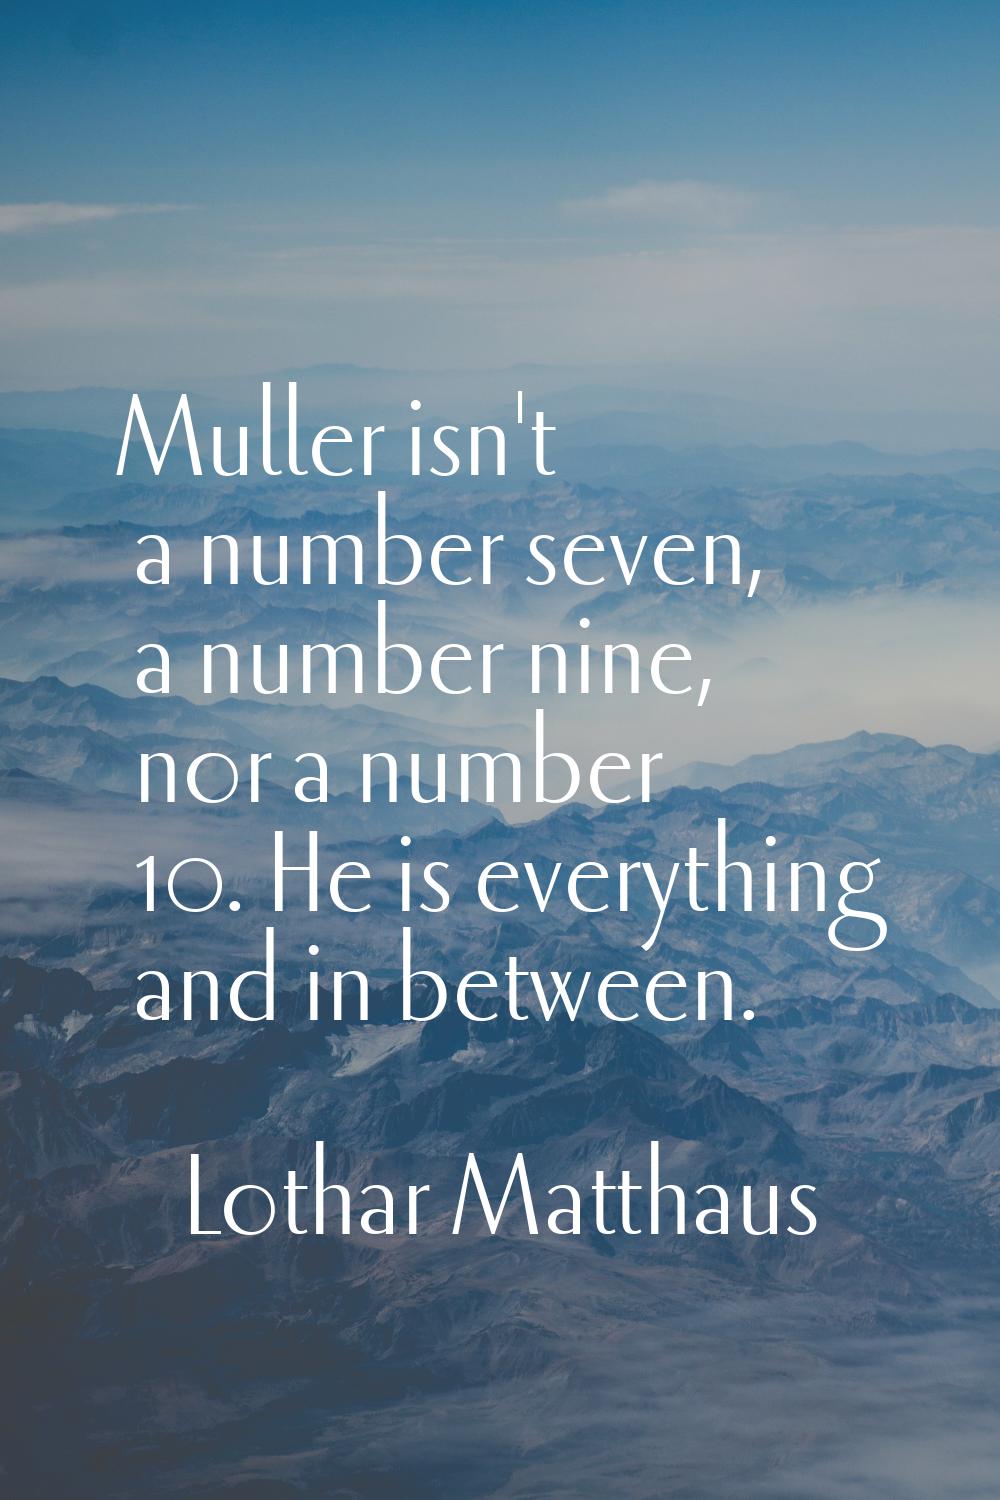 Muller isn't a number seven, a number nine, nor a number 10. He is everything and in between.